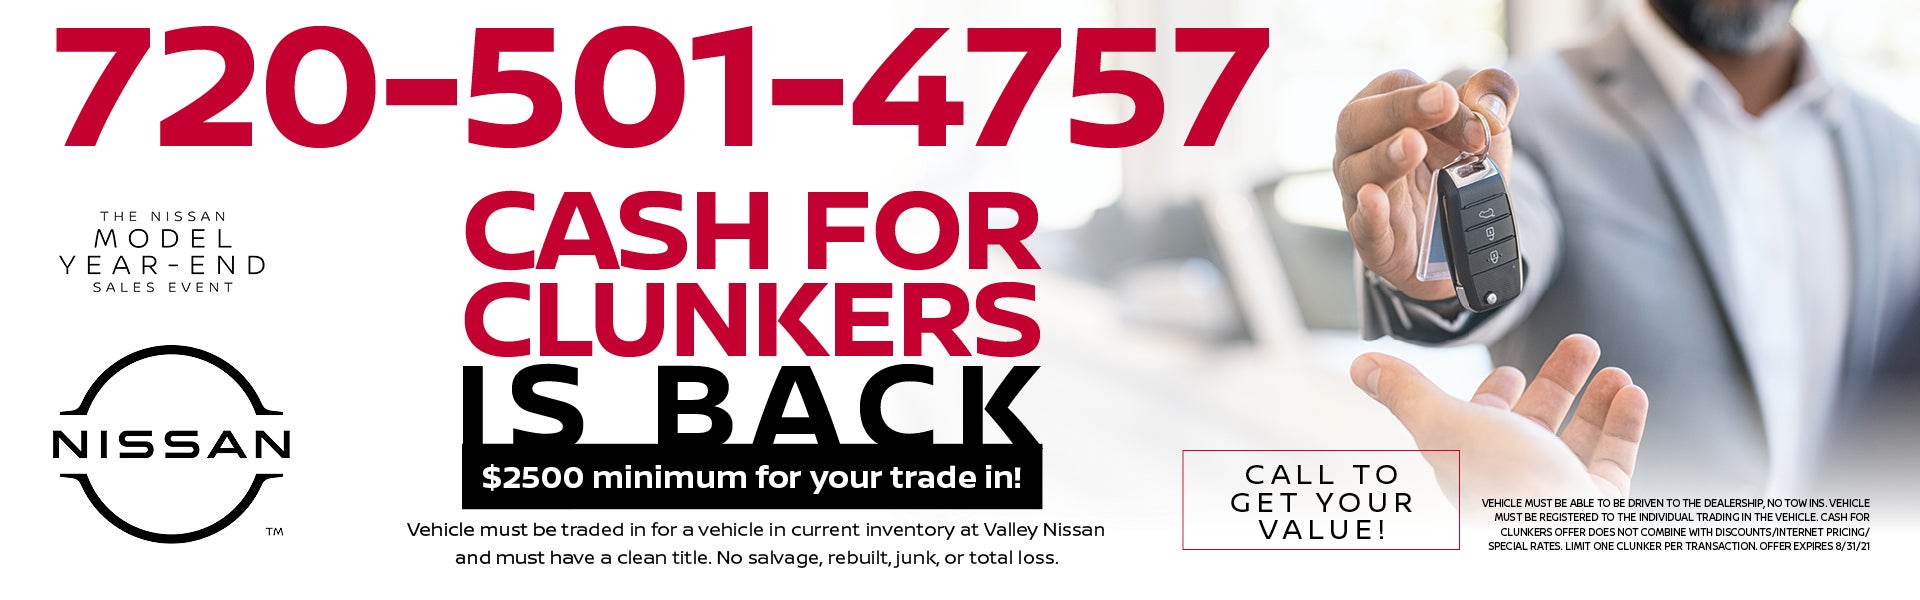 Cash for Clunkers is back